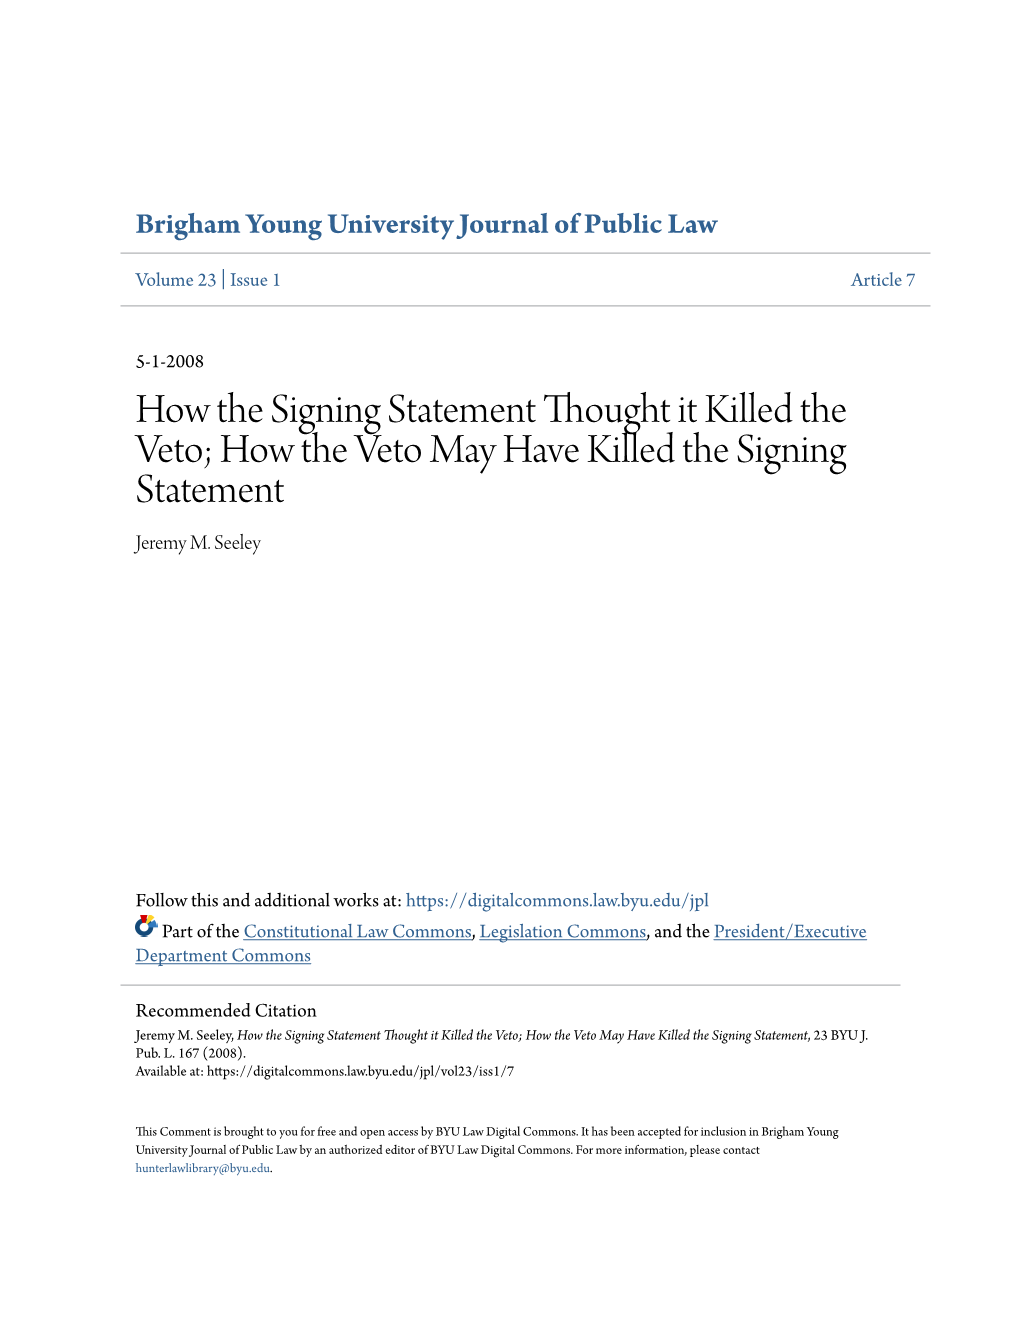 How the Signing Statement Thought It Killed the Veto; How the Veto May Have Killed the Signing Statement Jeremy M